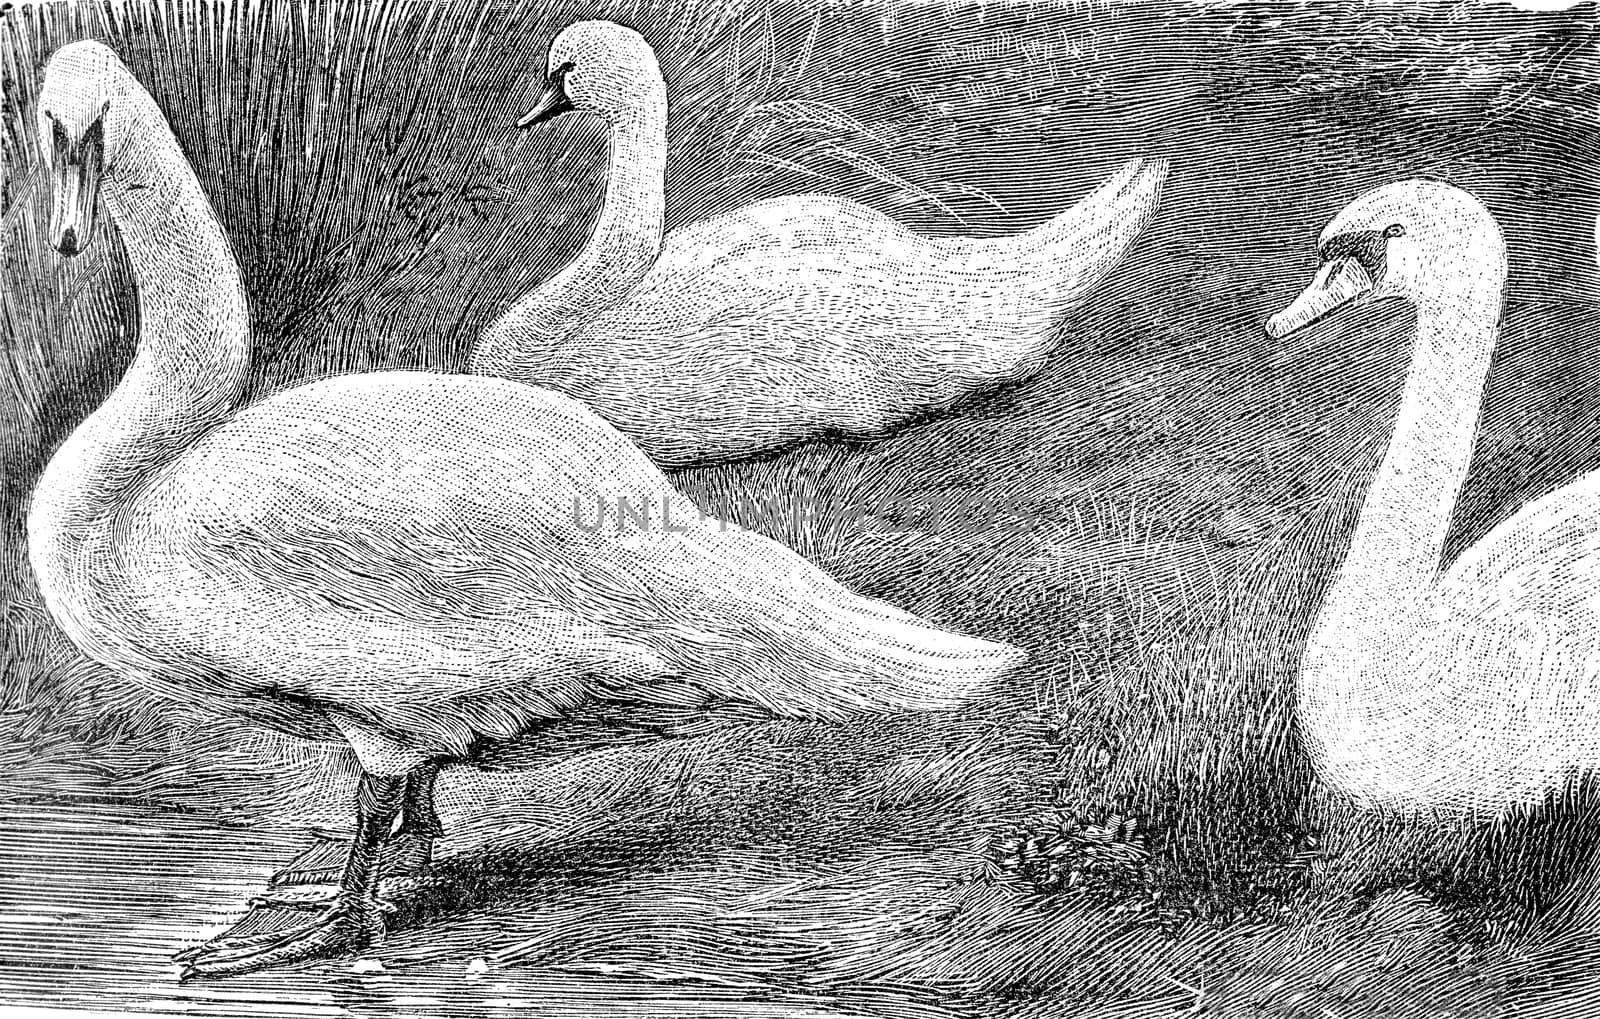 The Swan, vintage engraved illustration. From Deutch Vogel Teaching in Zoology.
